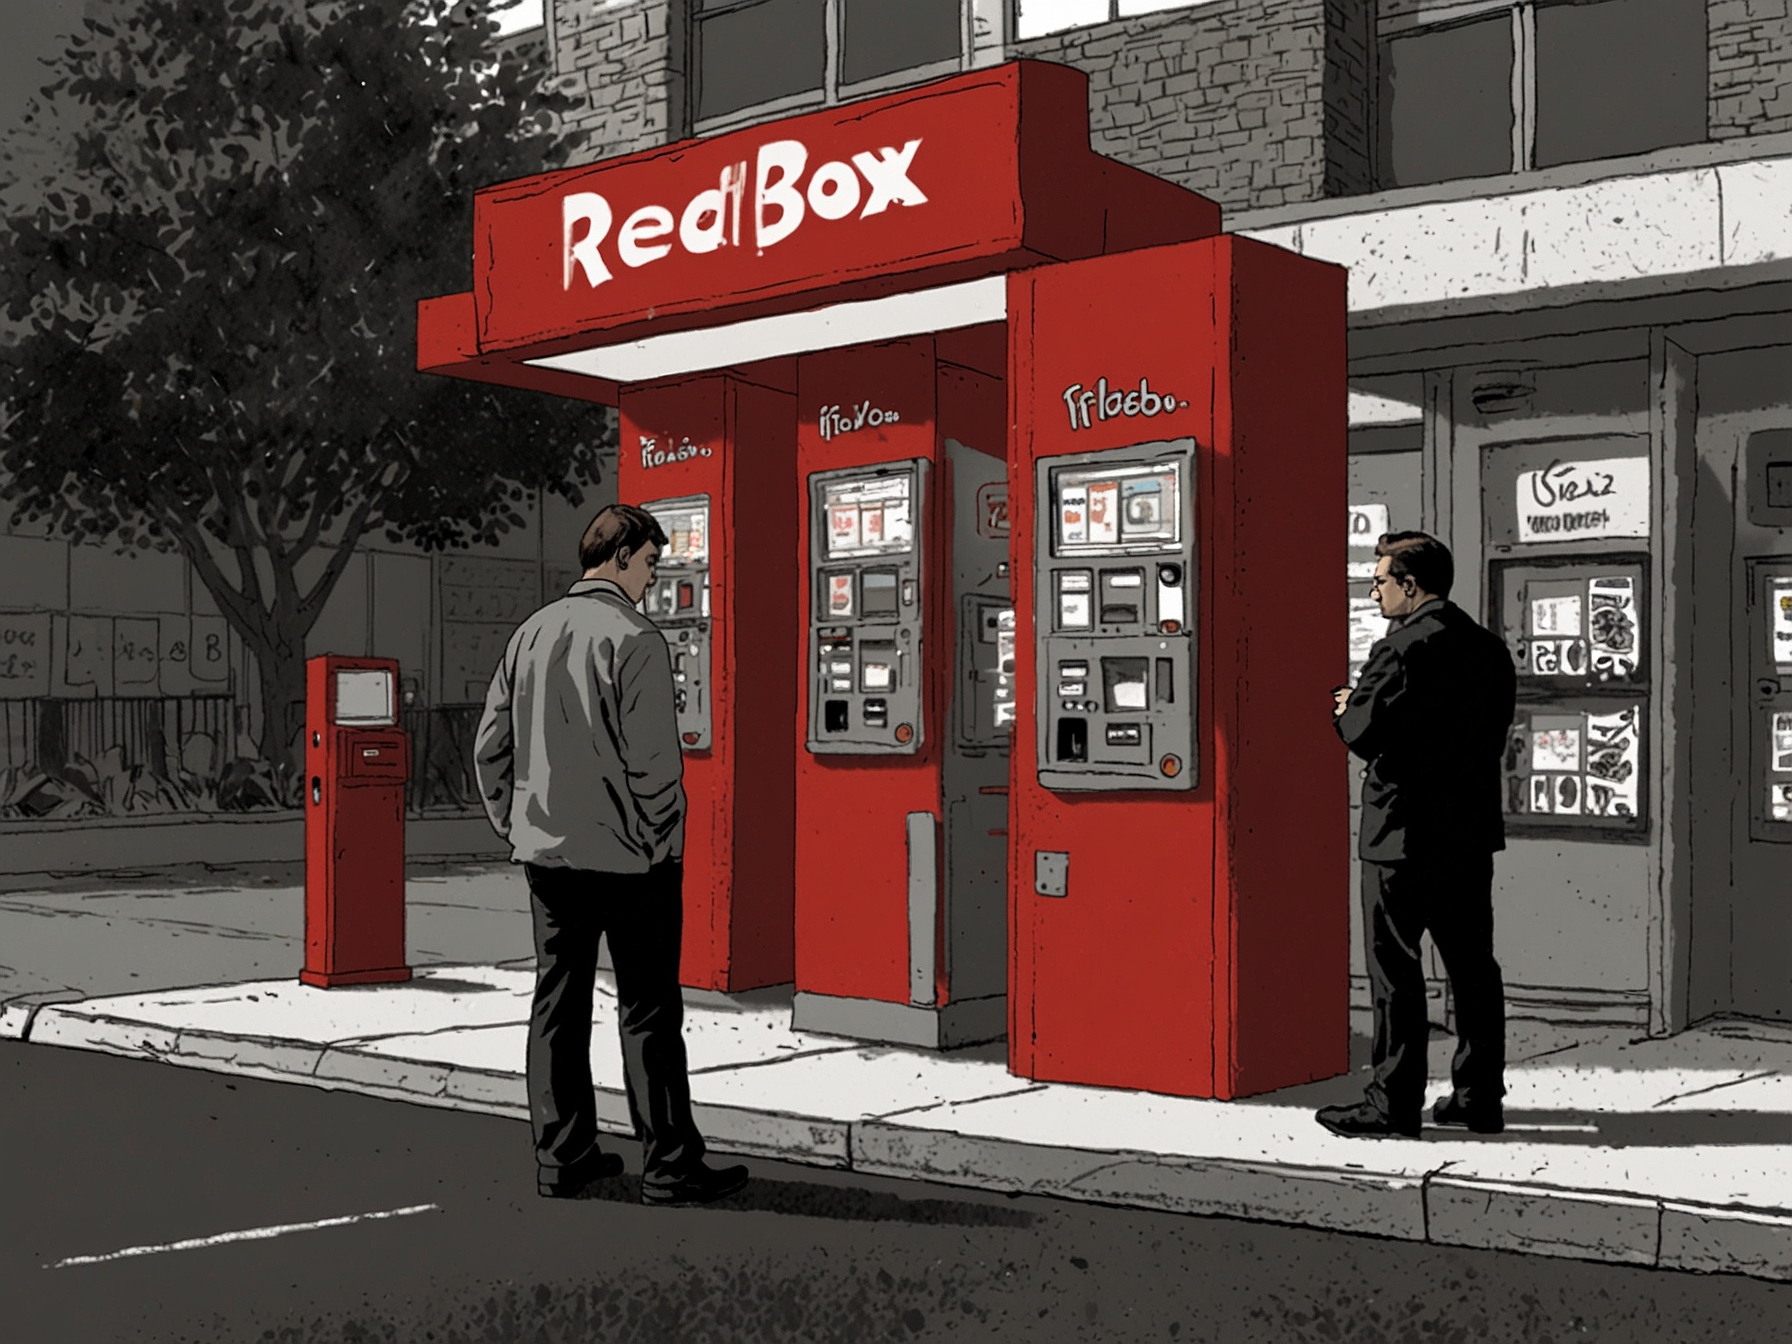 A worried employee stands in front of Redbox kiosks, symbolizing the company's financial challenges and the decline in DVD rentals as consumers shift to digital streaming platforms.